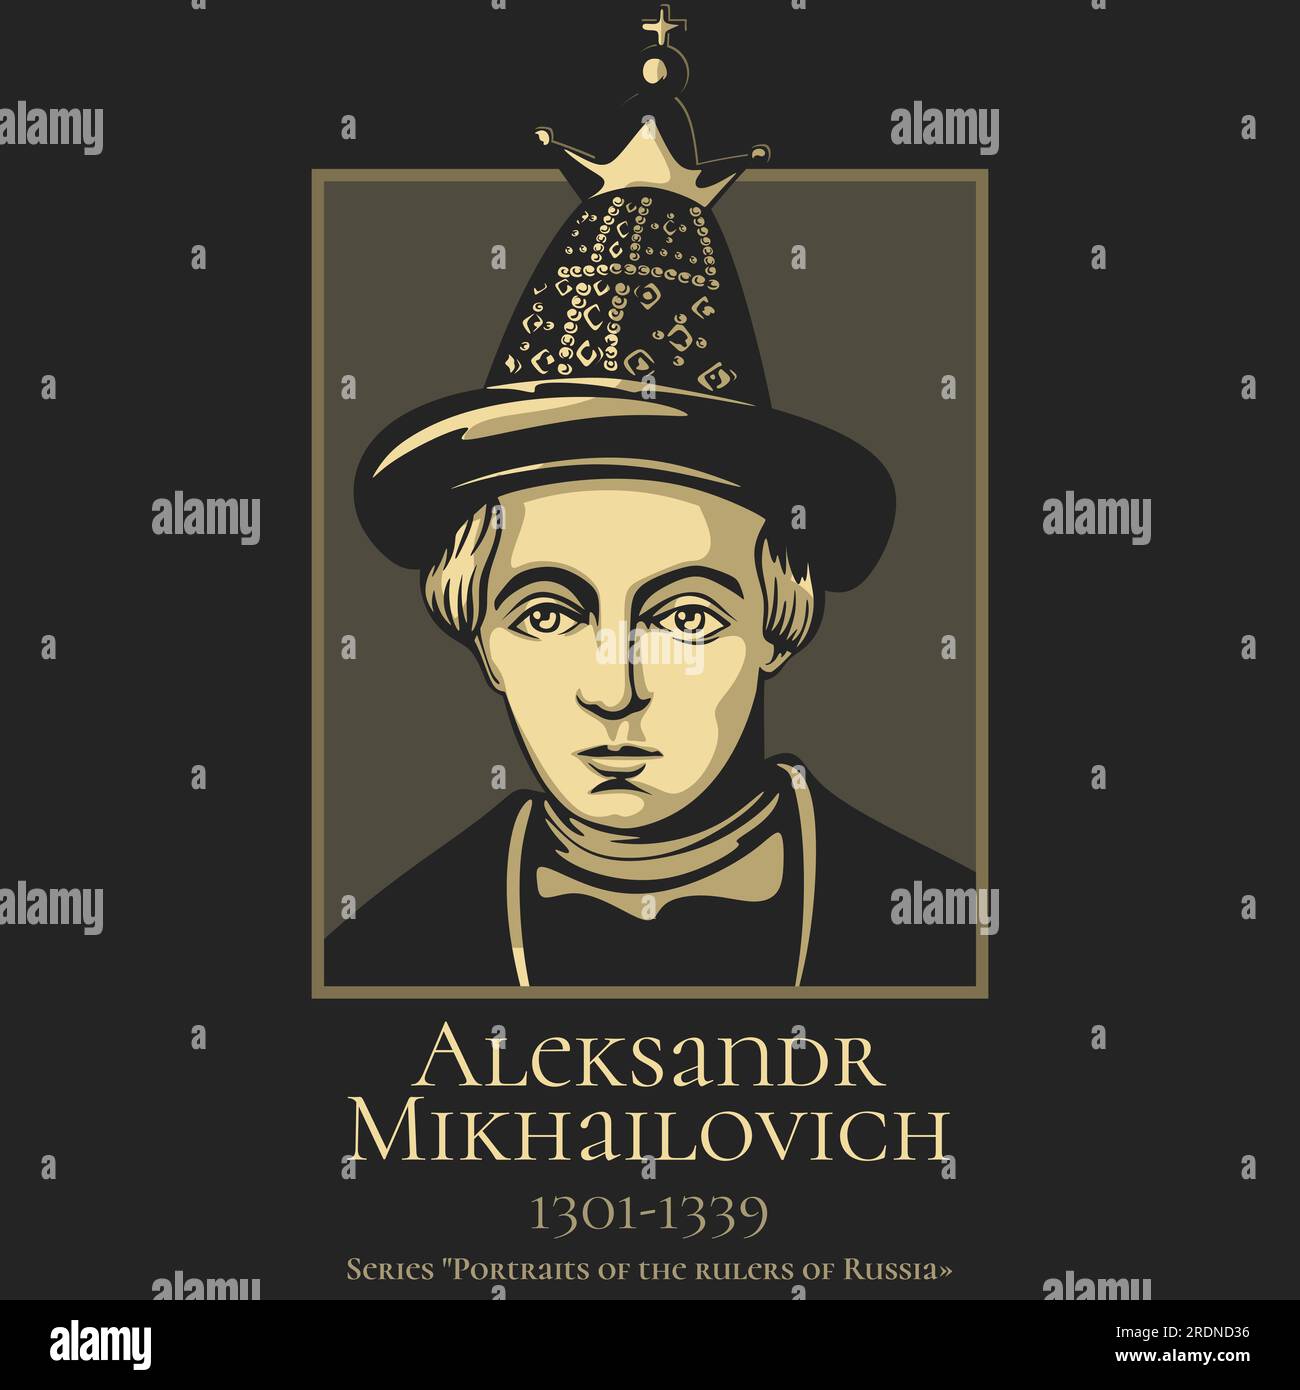 Portrait of the rulers of Russia. Aleksandr Mikhailovich (1301-1339) was a Prince of Tver as Alexander I and Grand Prince of Vladimir-Suzdal as Alexan Stock Vector